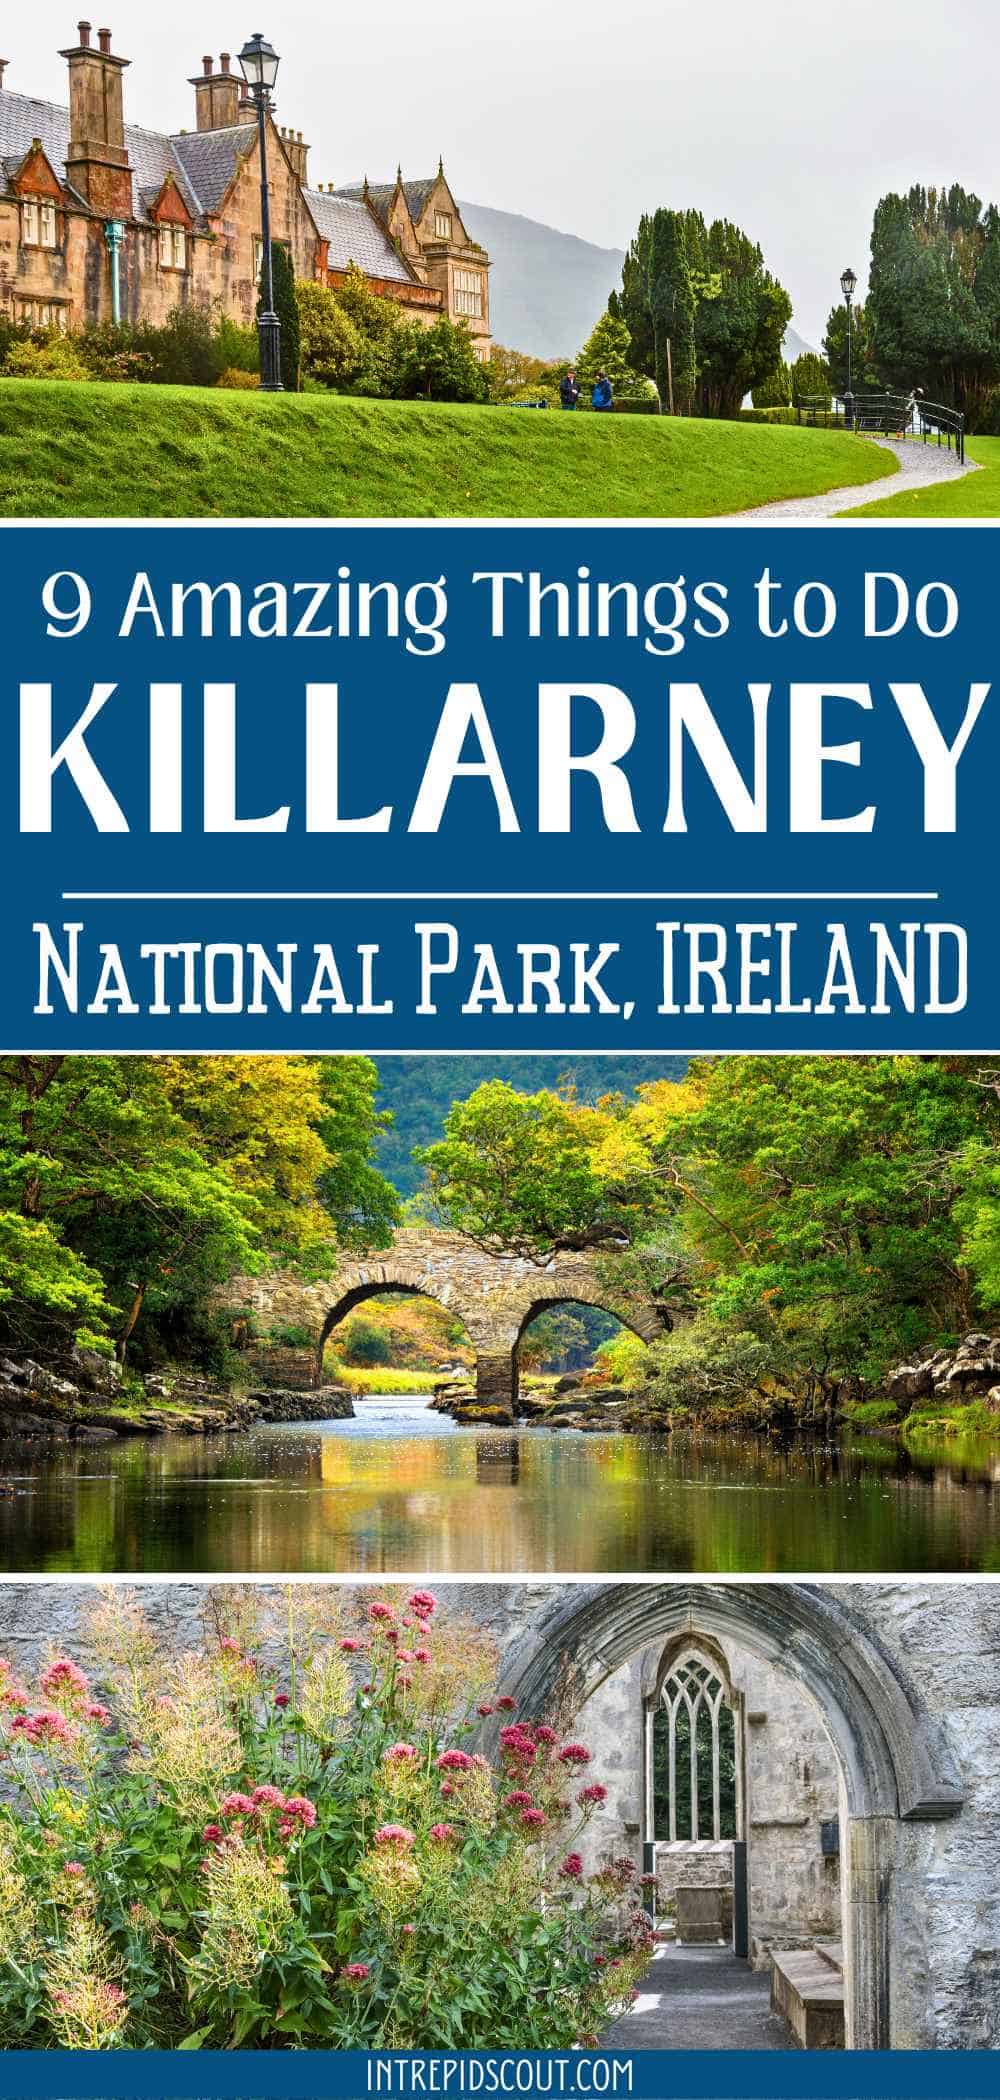 Things to Do in Killarney National Park